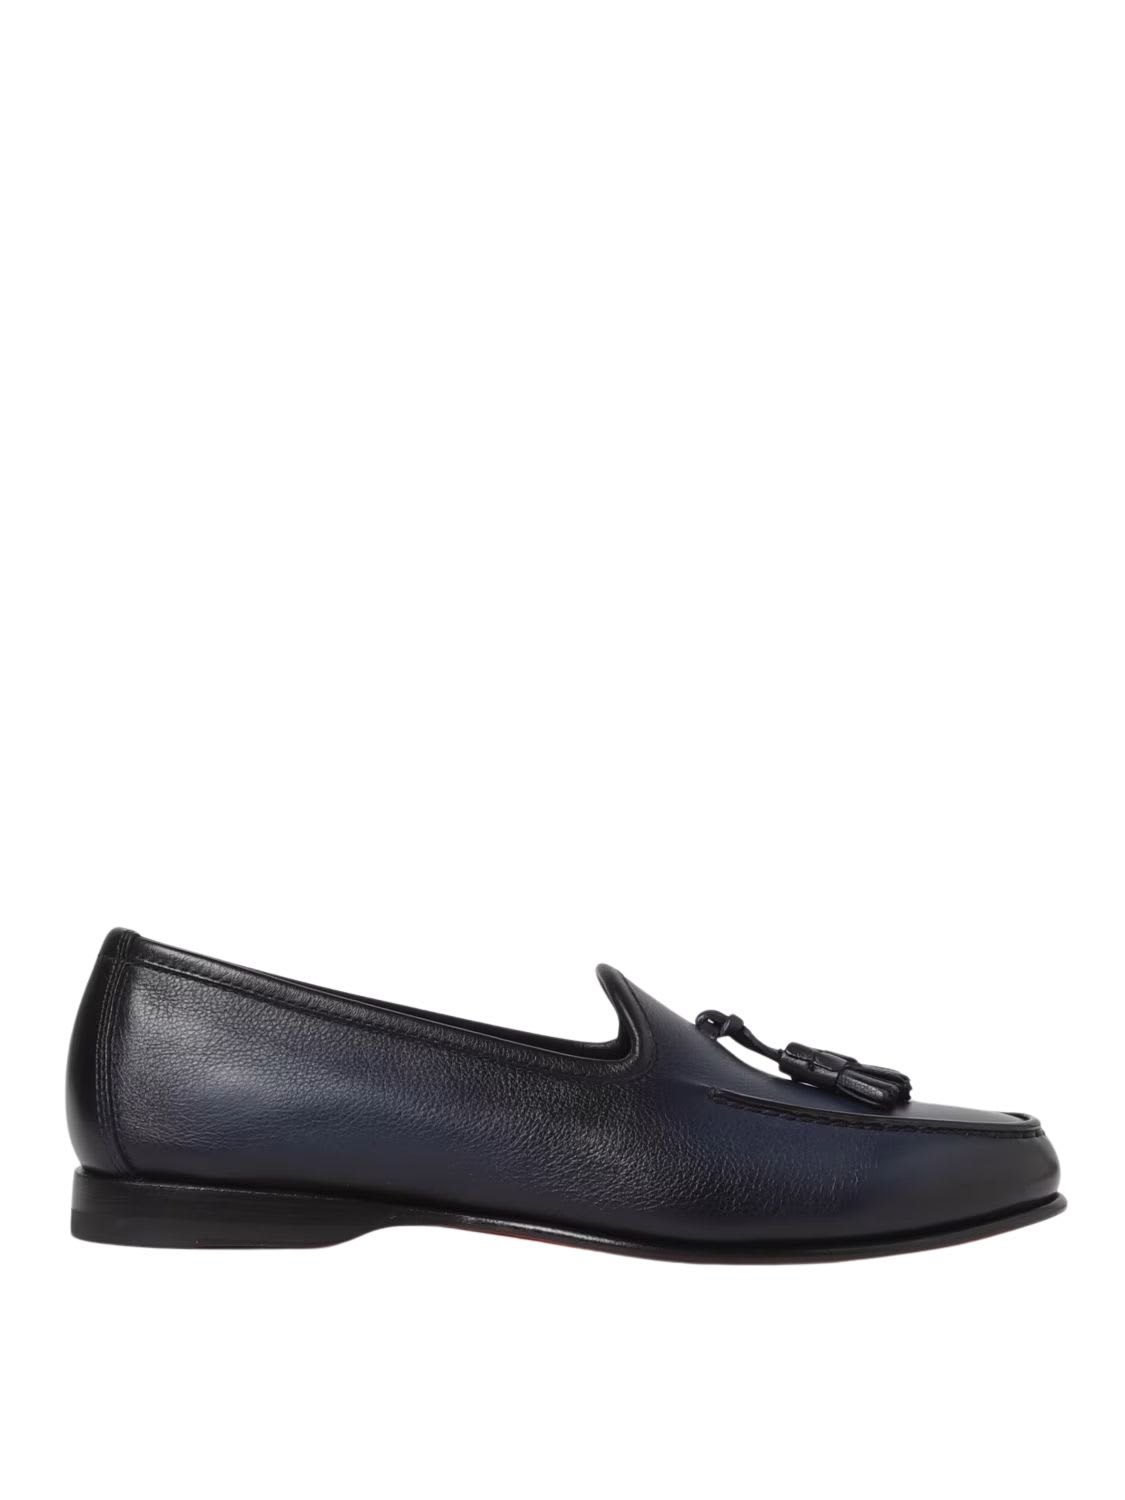 Santoni Leather Loafers With Tassels In Black